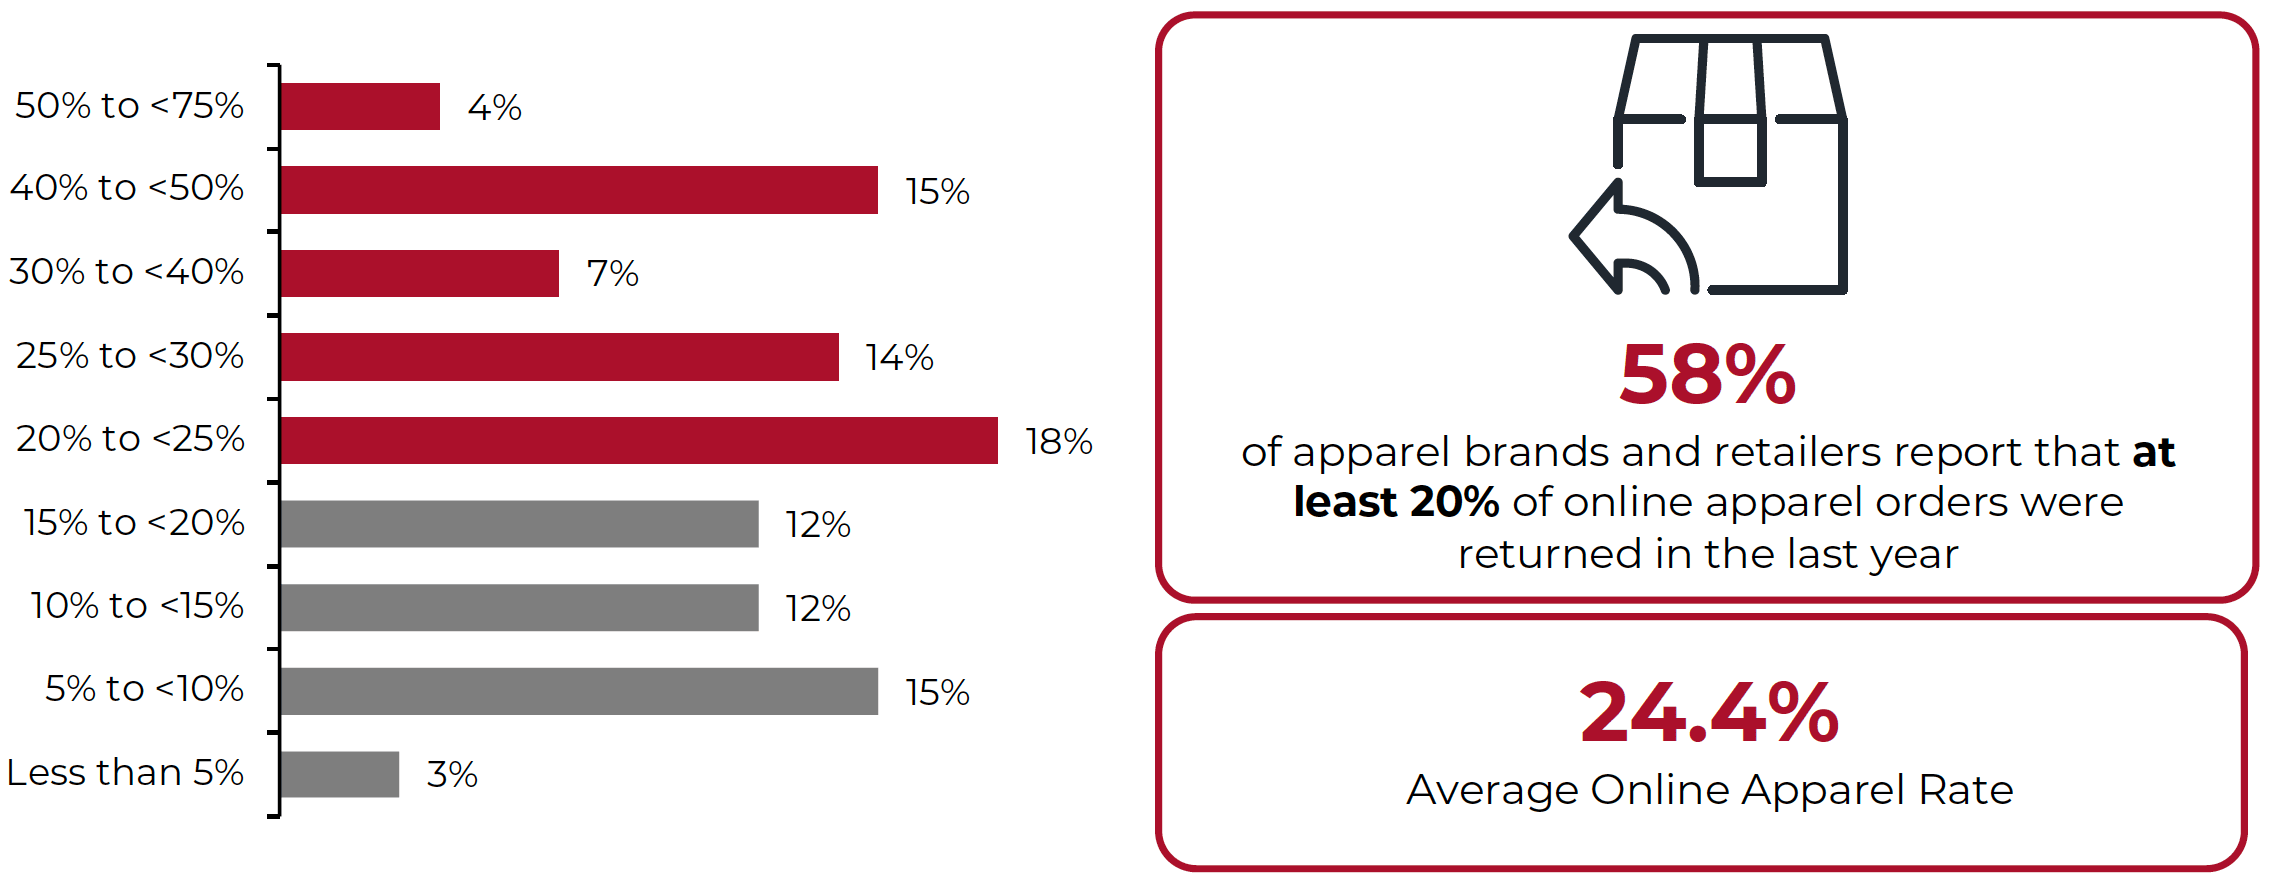 A bar chart displaying the percentage of online shoppers and alarming return rates for apparel purchases.